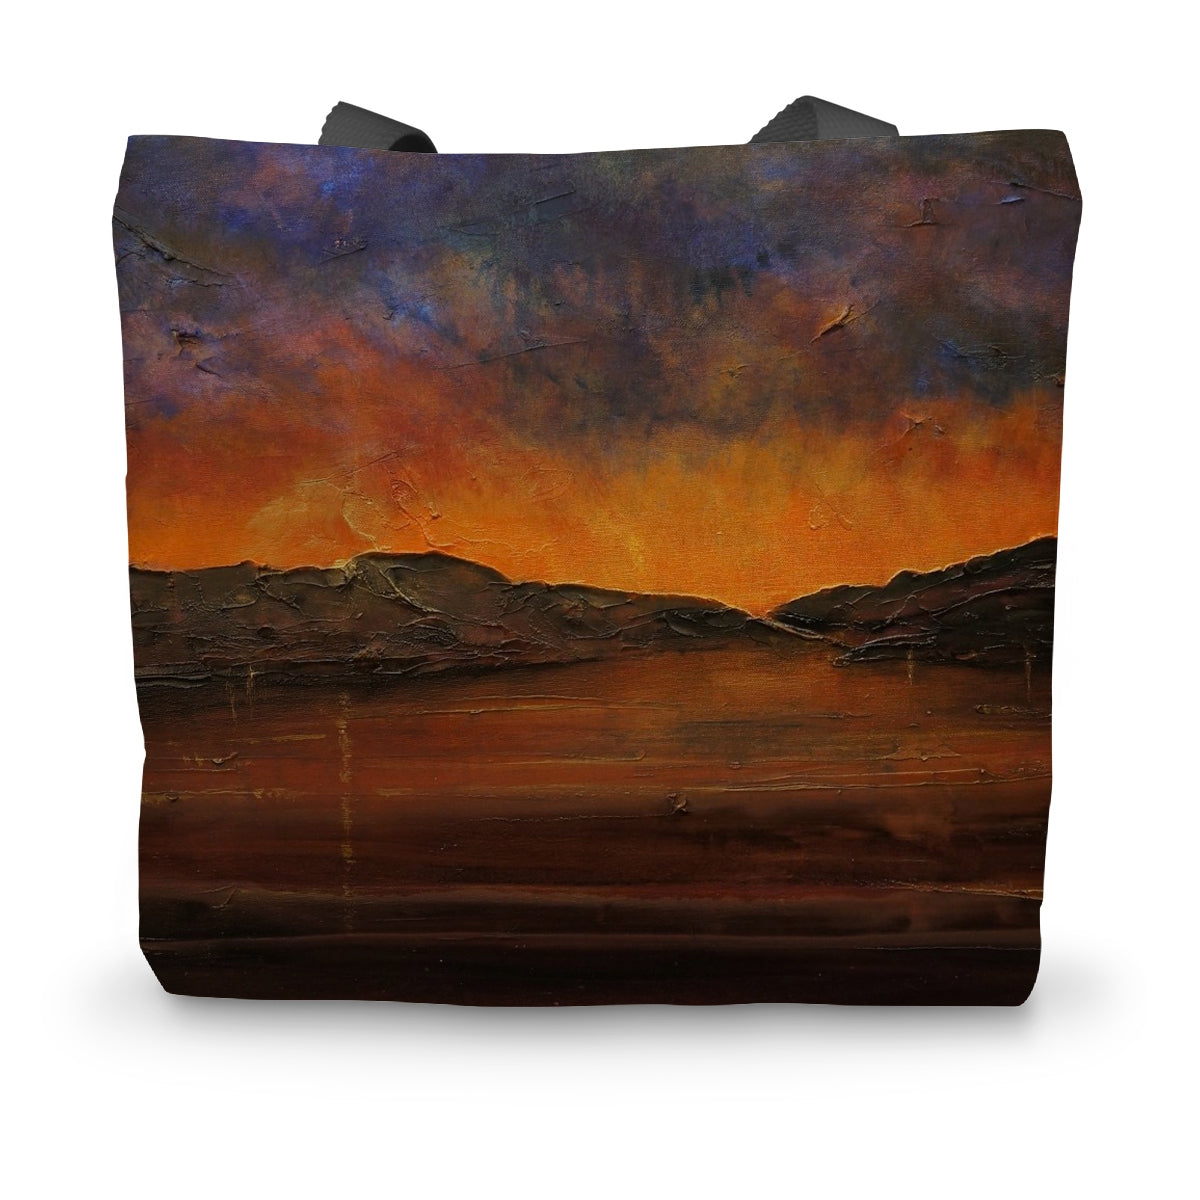 A Brooding Clyde Dusk Art Gifts Canvas Tote Bag-Bags-River Clyde Art Gallery-14"x18.5"-Paintings, Prints, Homeware, Art Gifts From Scotland By Scottish Artist Kevin Hunter